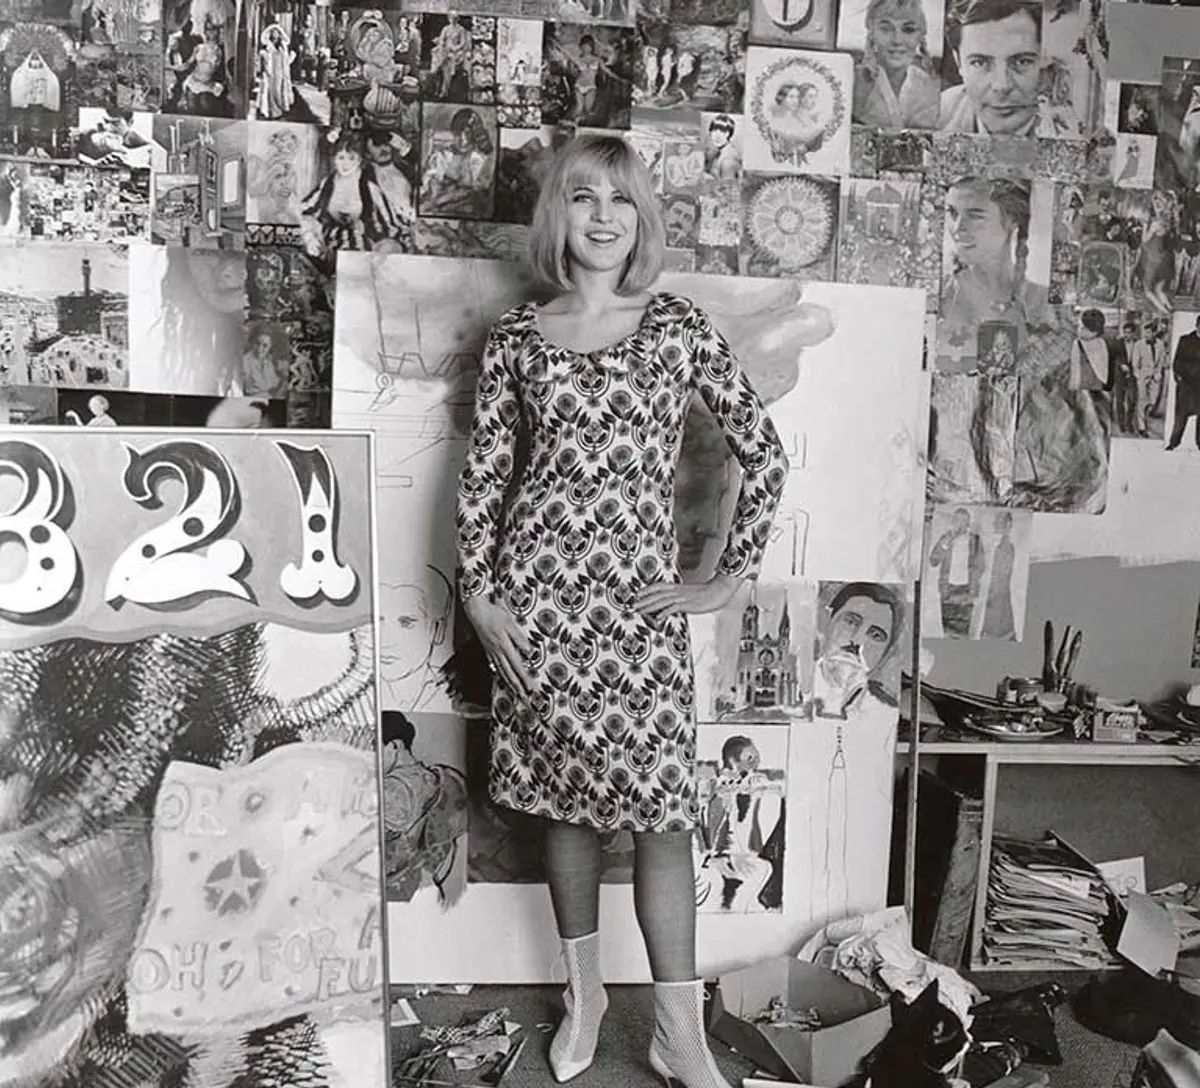 Planet Pop: Pauline Boty—in her studio in 1963—was one of the four artists exhibited at the first Pop art show in London in 1961

National Portrait Gallery, London
